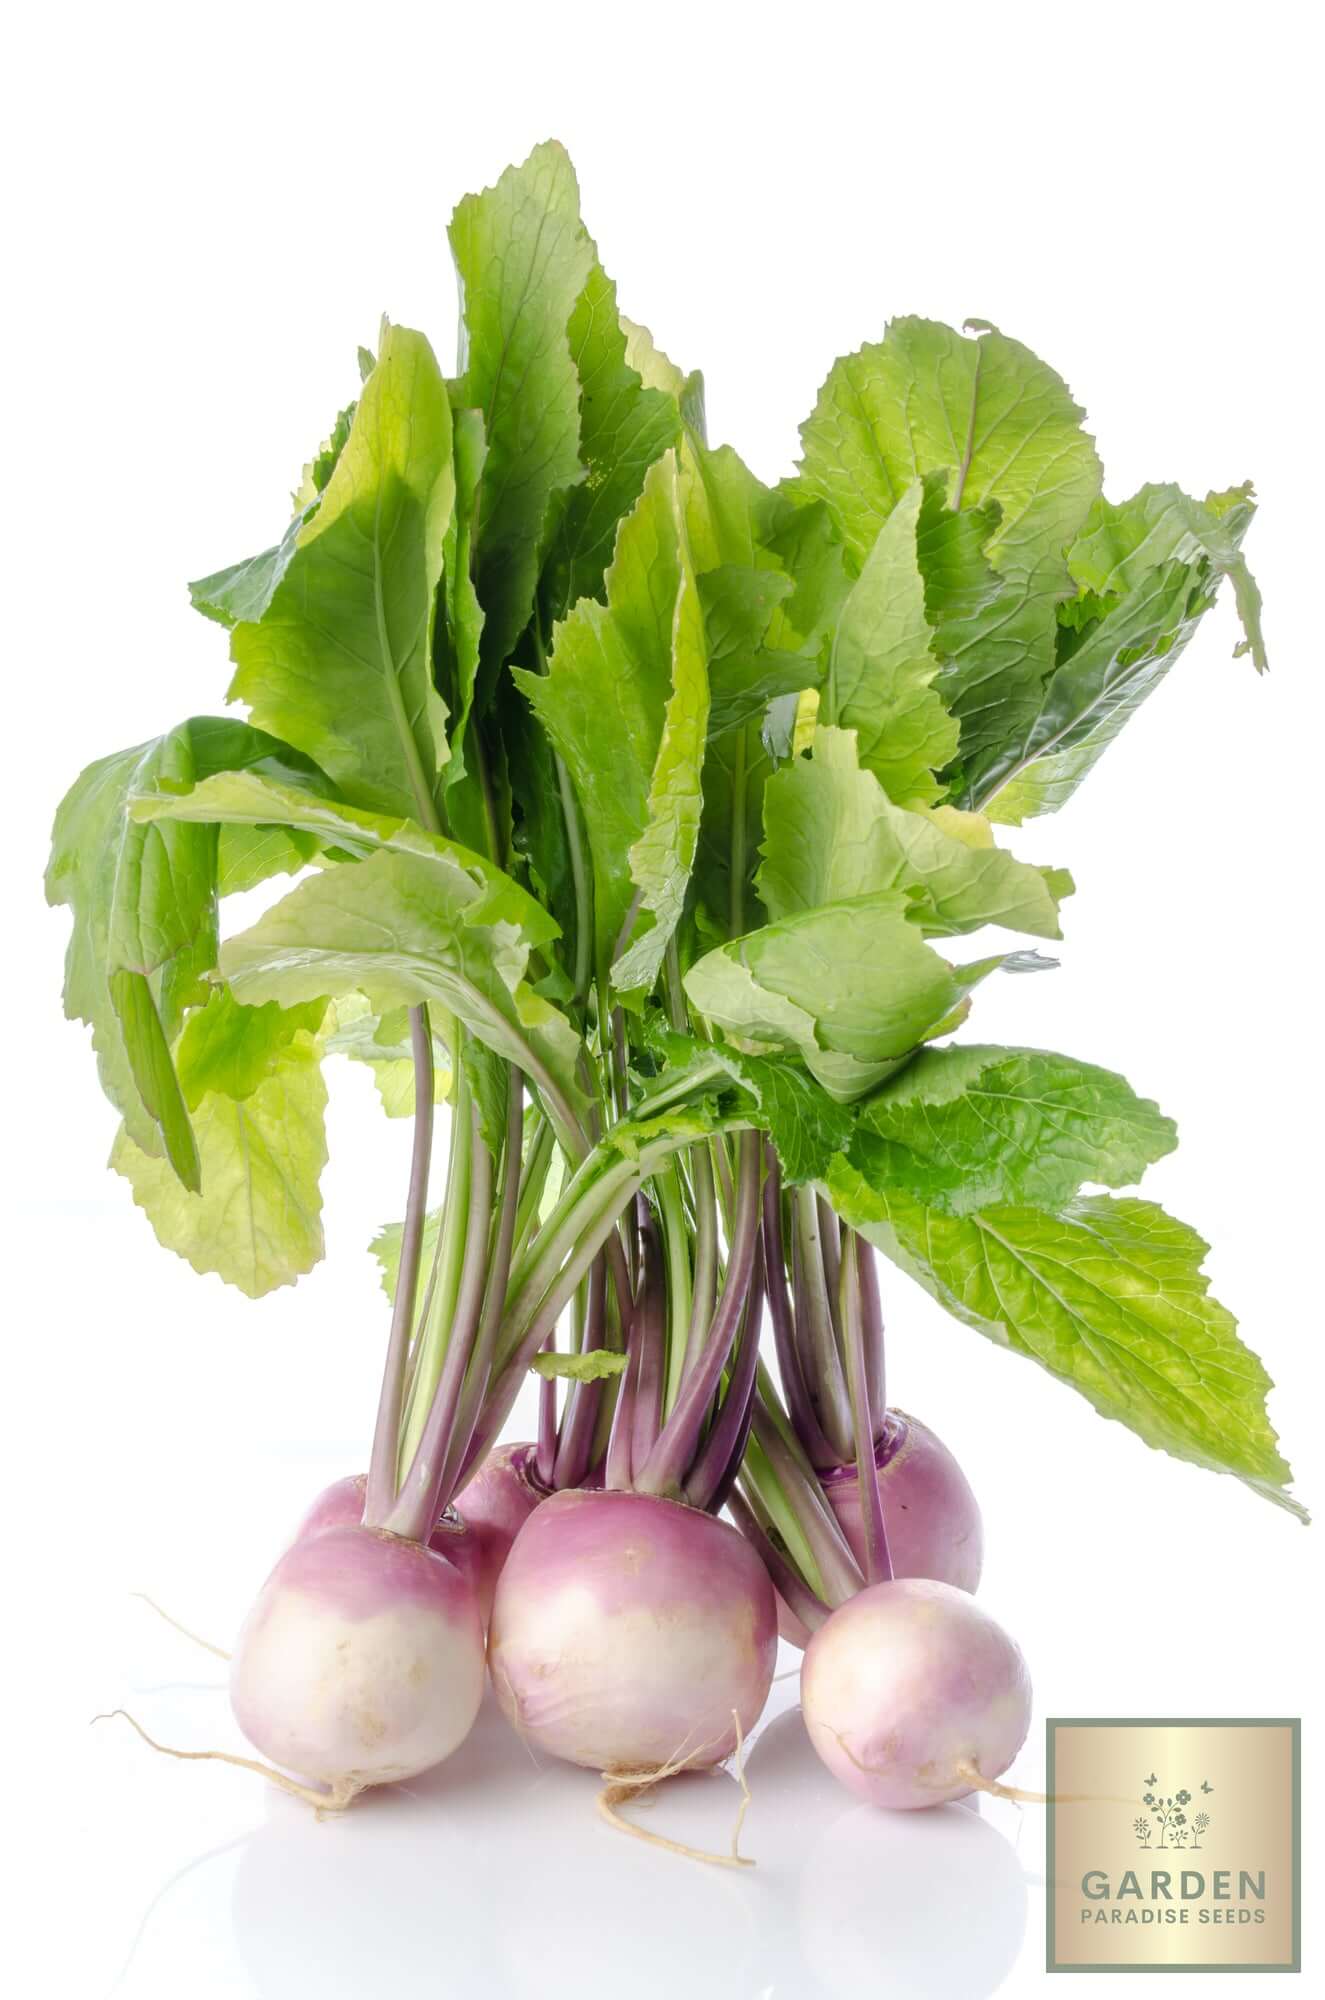 Shop for Purple Turnip Seeds - Add a Pop of Color to Your Meals with this Distinctive Vegetable